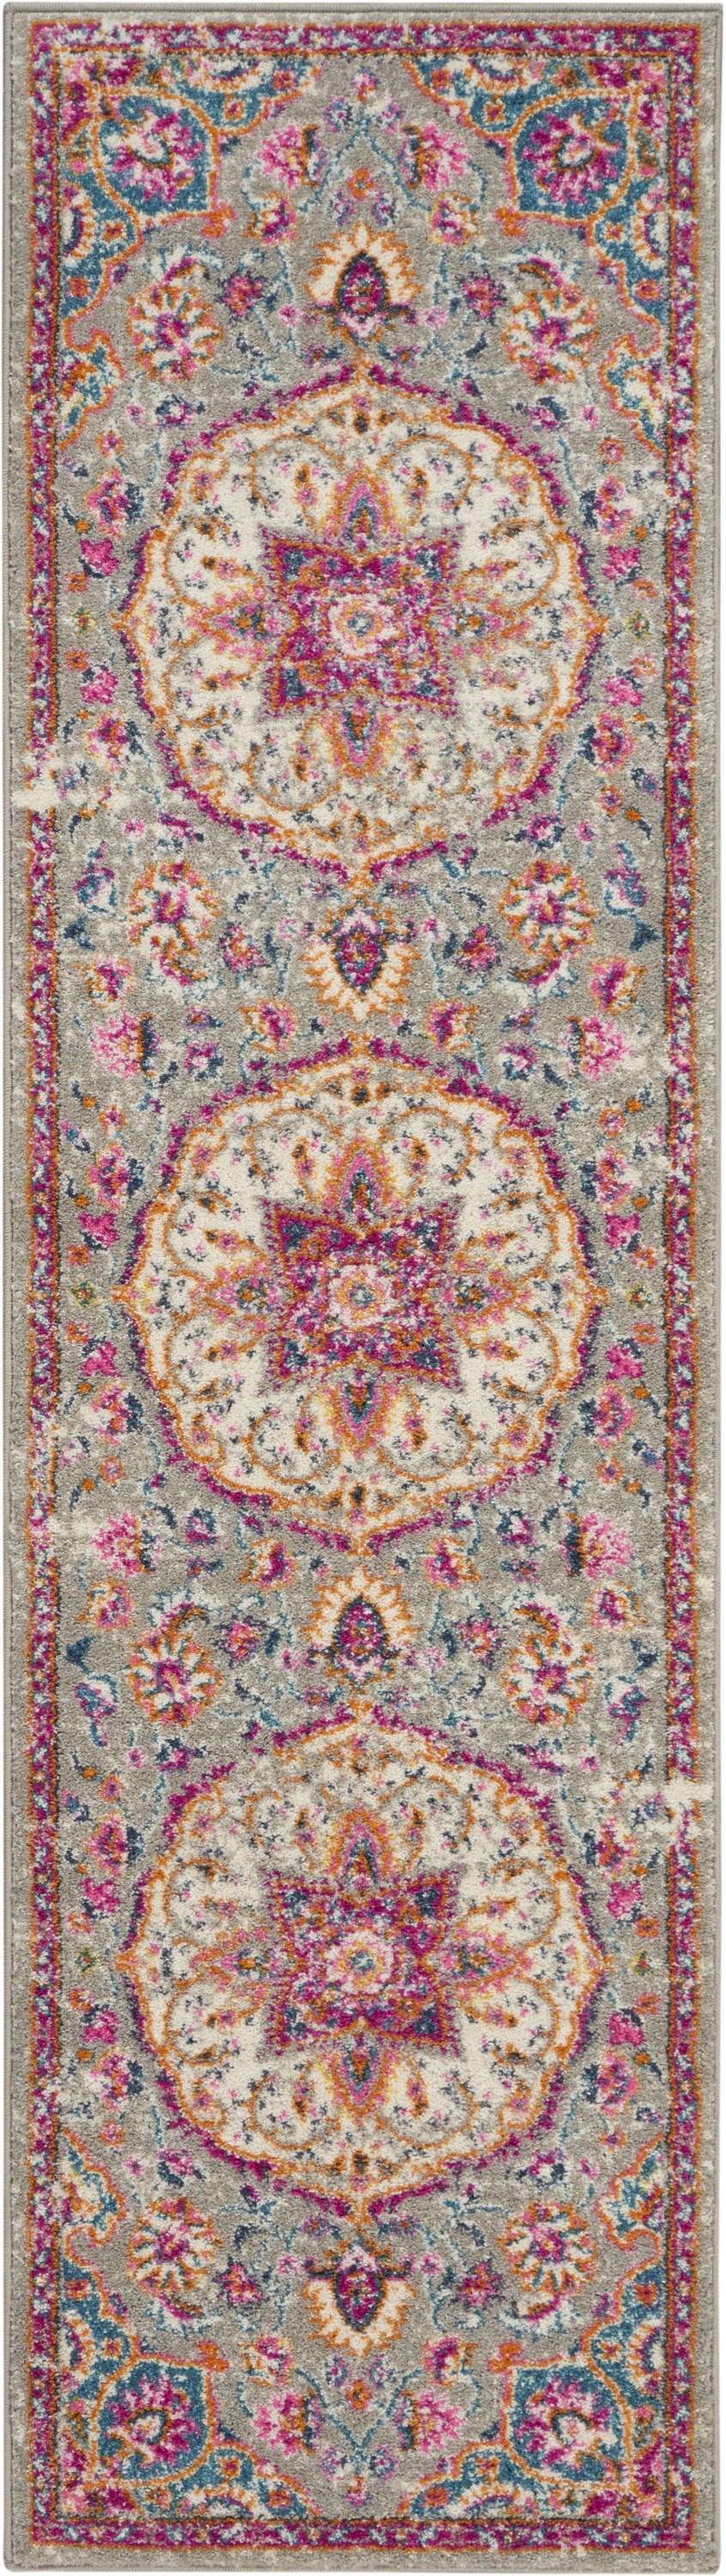 6' Pink And Gray Power Loom Runner Rug-385517-1